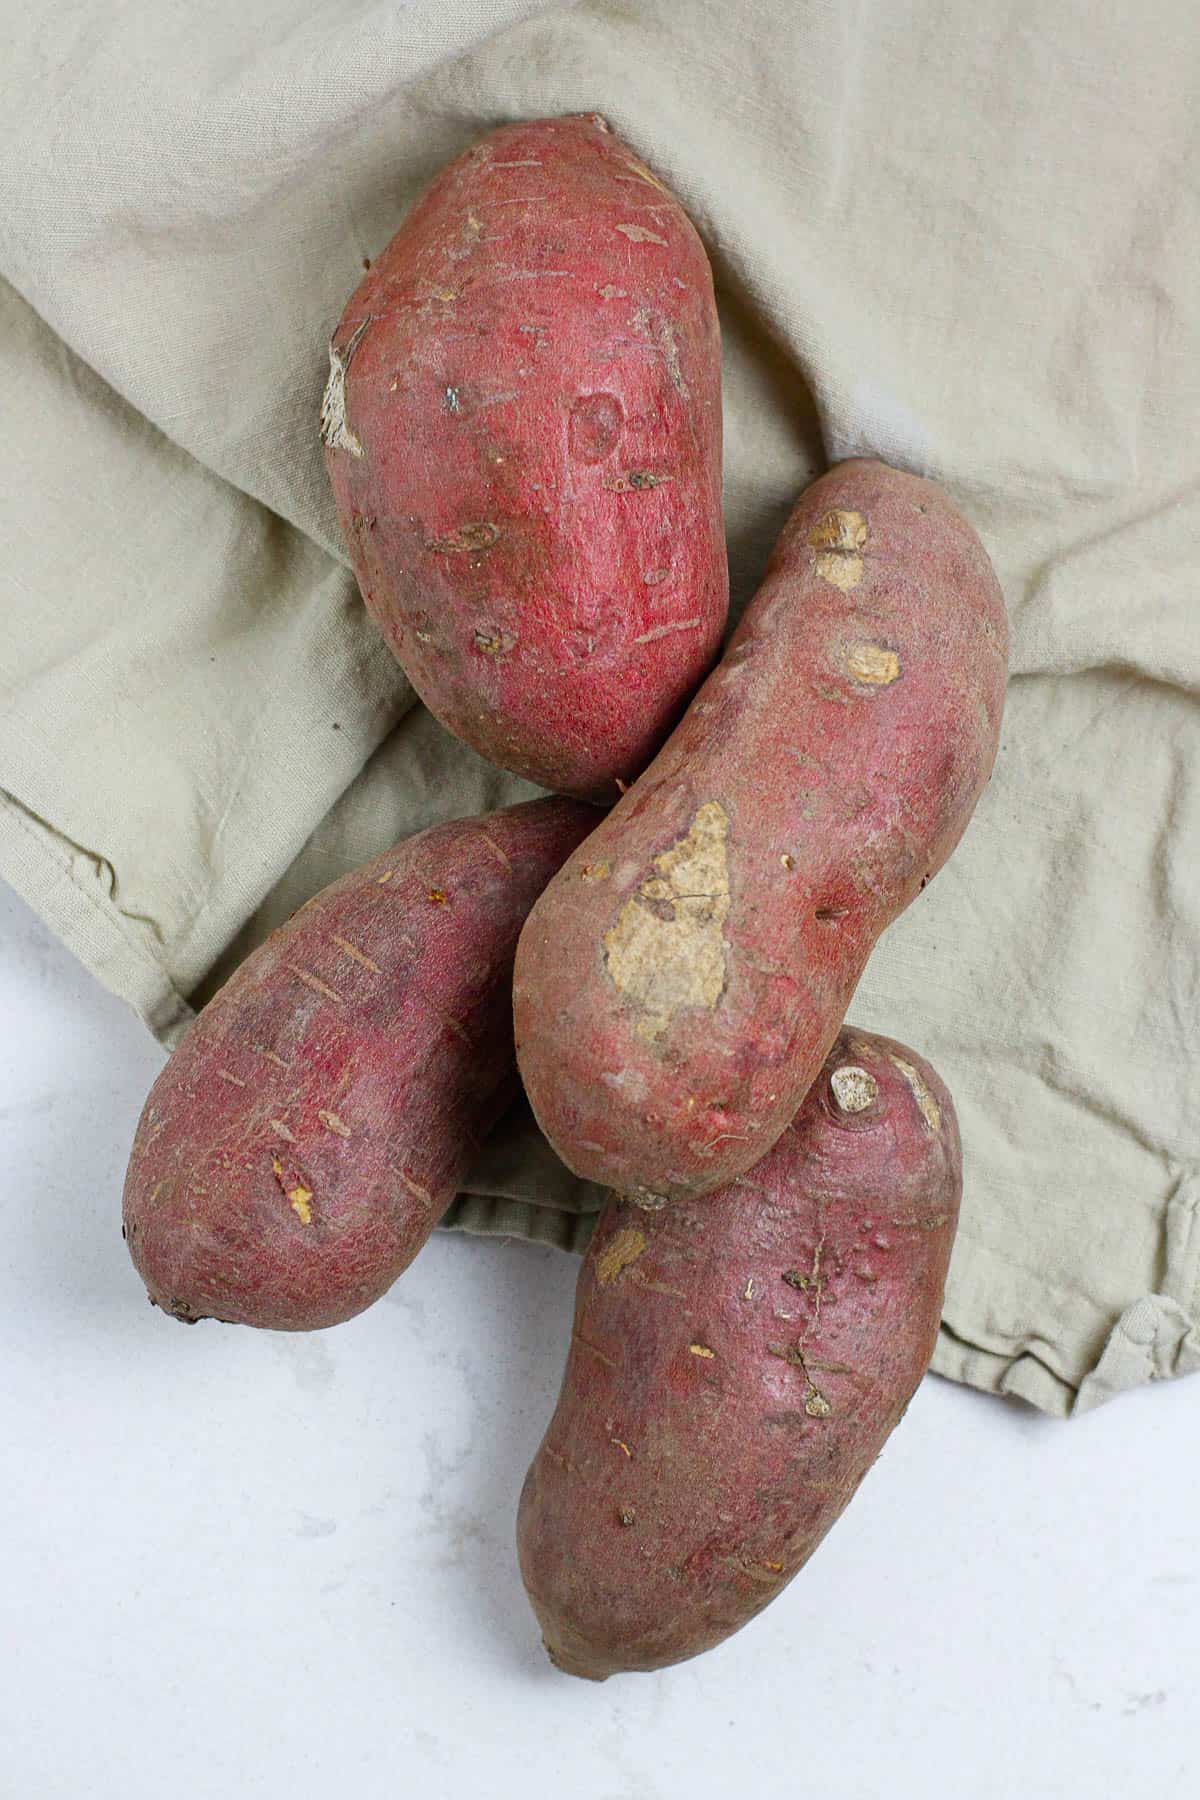 Top view of four Japanese sweet potatoes.